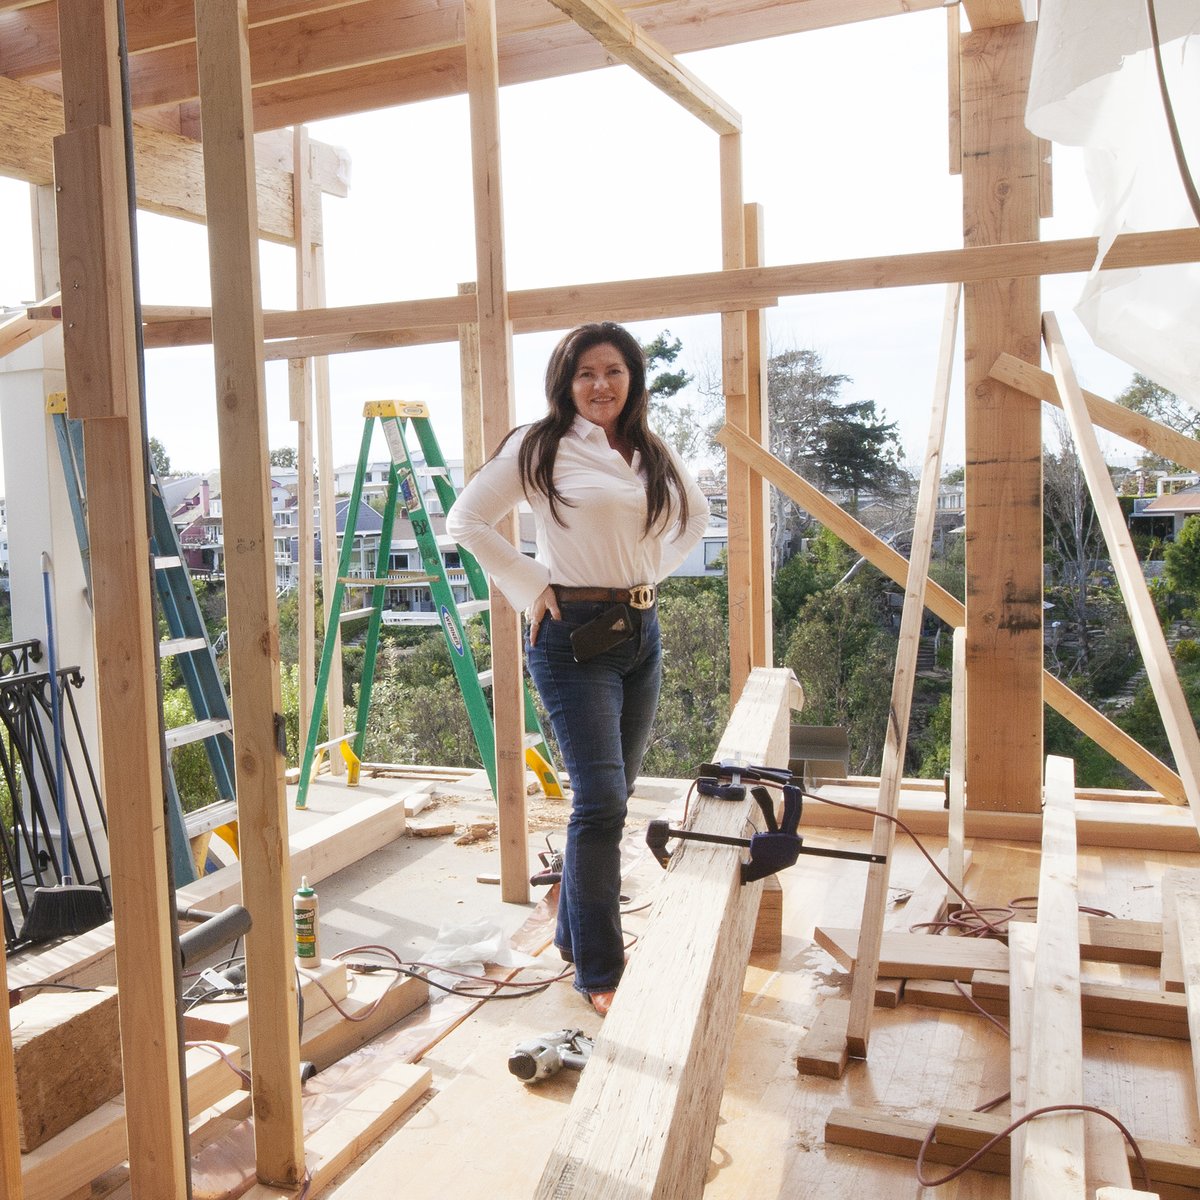 Proud to be a female designer and contractor. There's nothing like working in the dirt and getting it done right the first time. 

#designbuild #womeninconstruction #womeninarchitecture #womenindesign #femalecontractors #homeremodel #homedesign #homeconstruction #home #remodel